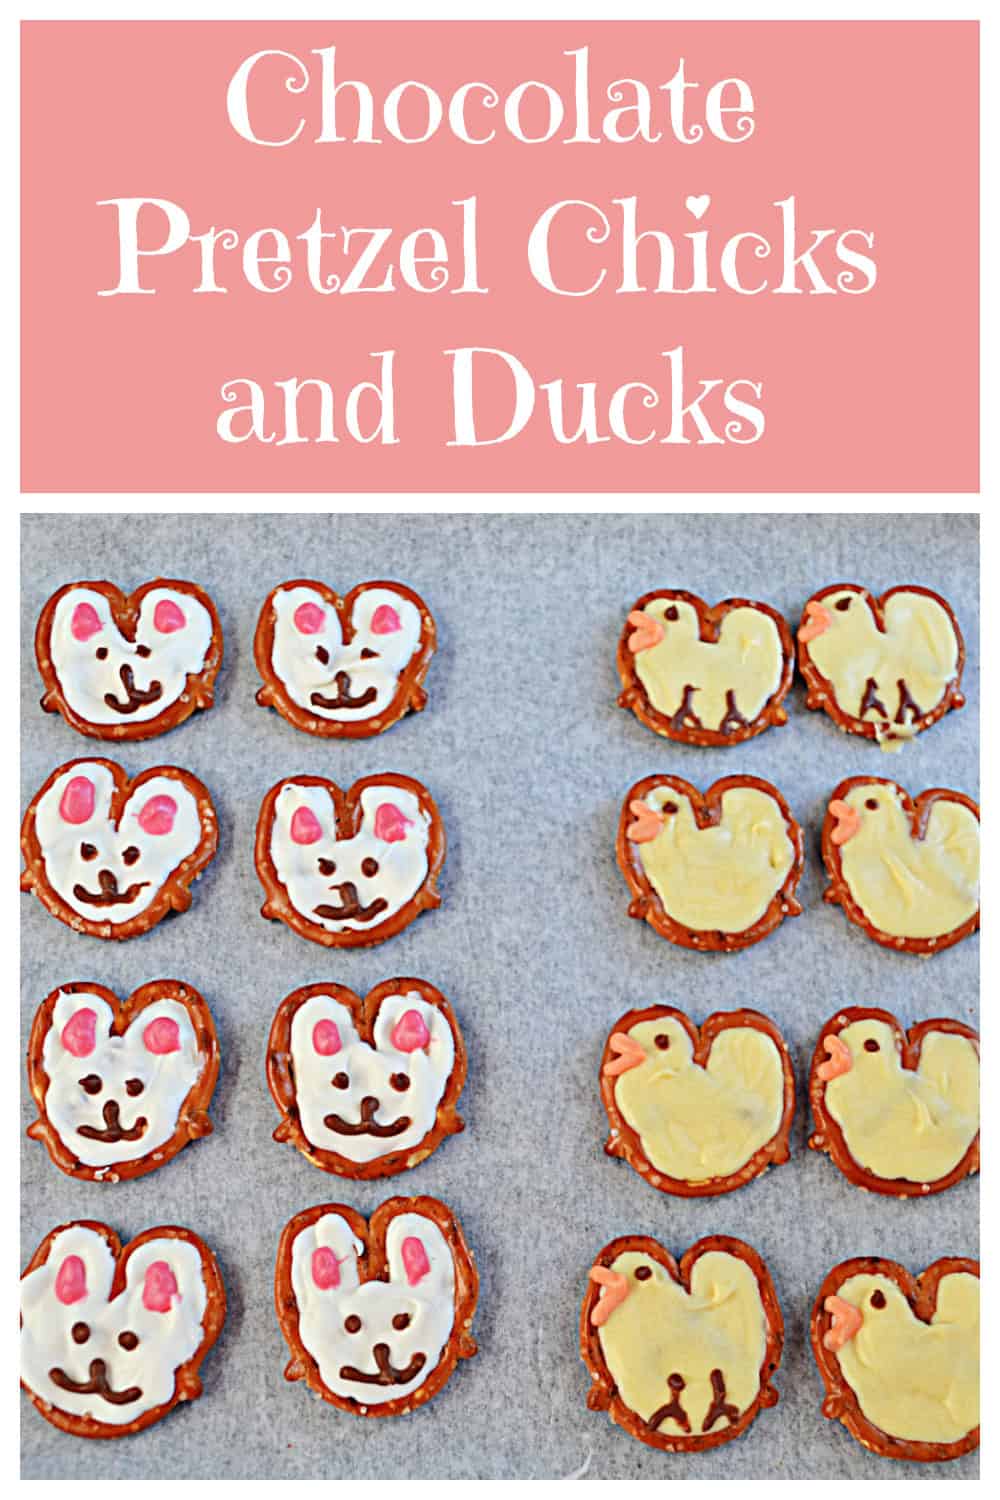 Chocolate Pretzel Chicks and Bunnies for Easter